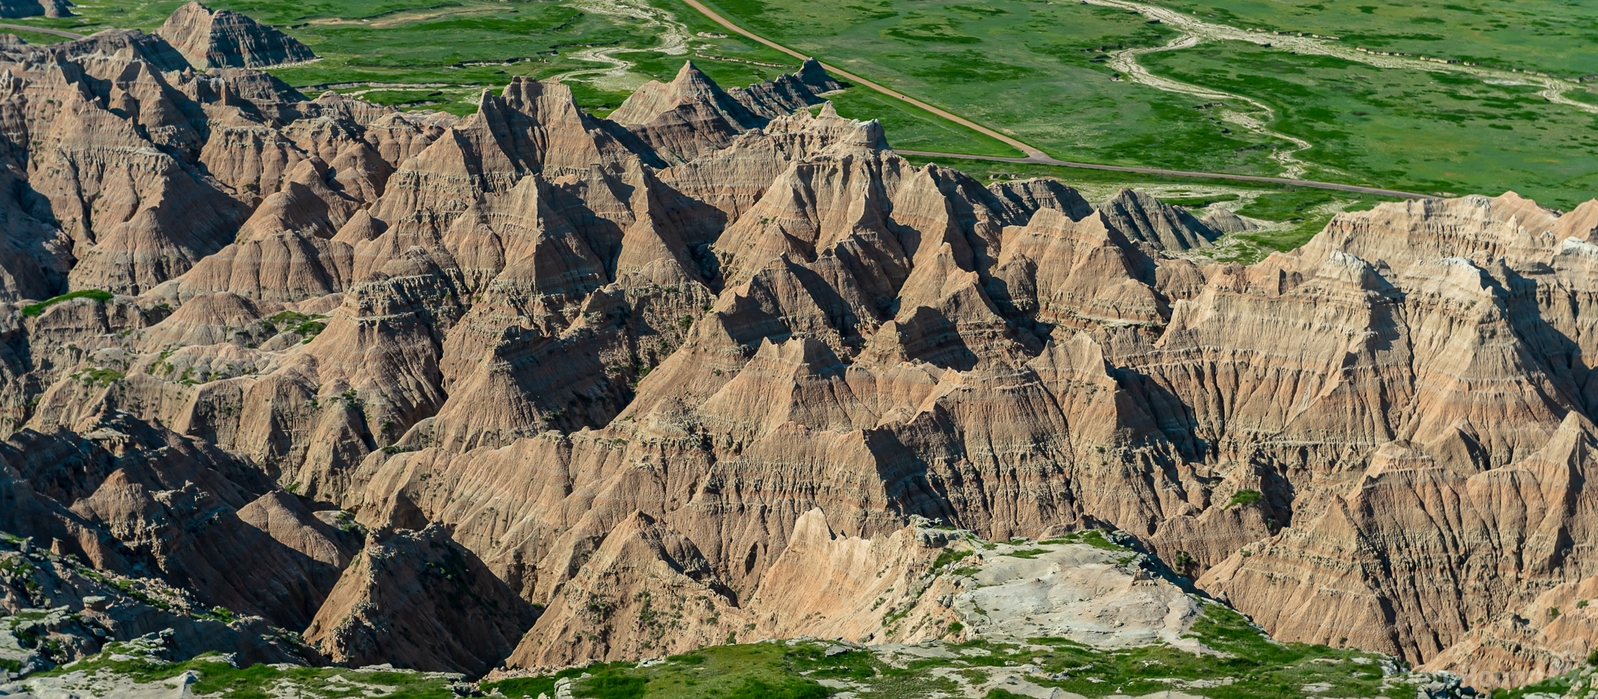 Image of Badlands N.P. Helicopter Tour by Sue Wolfe